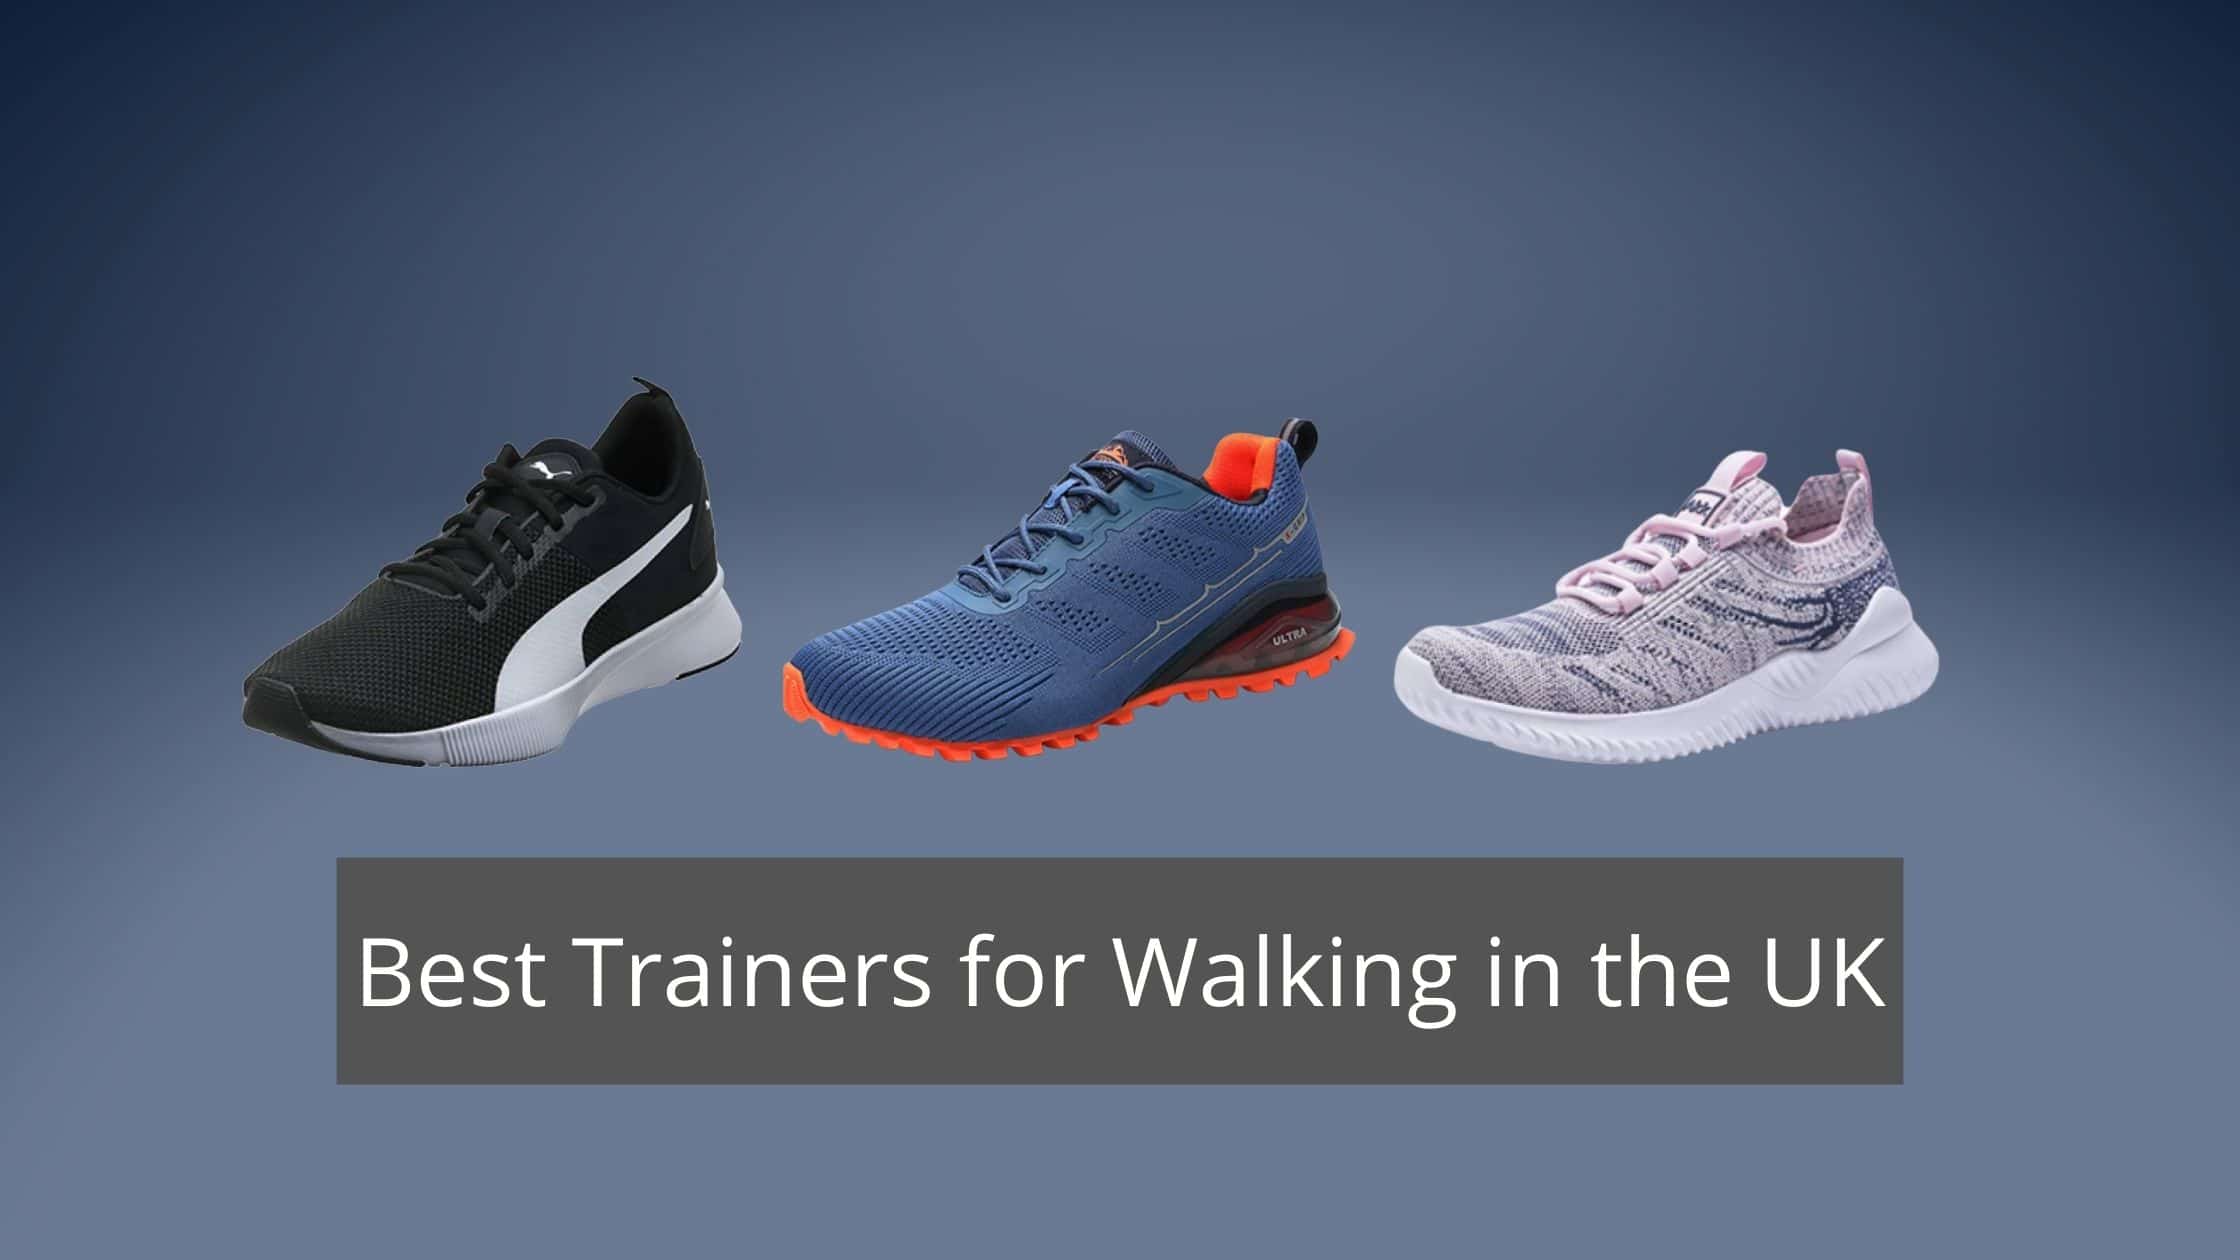 Best Trainers for Walking in the UK